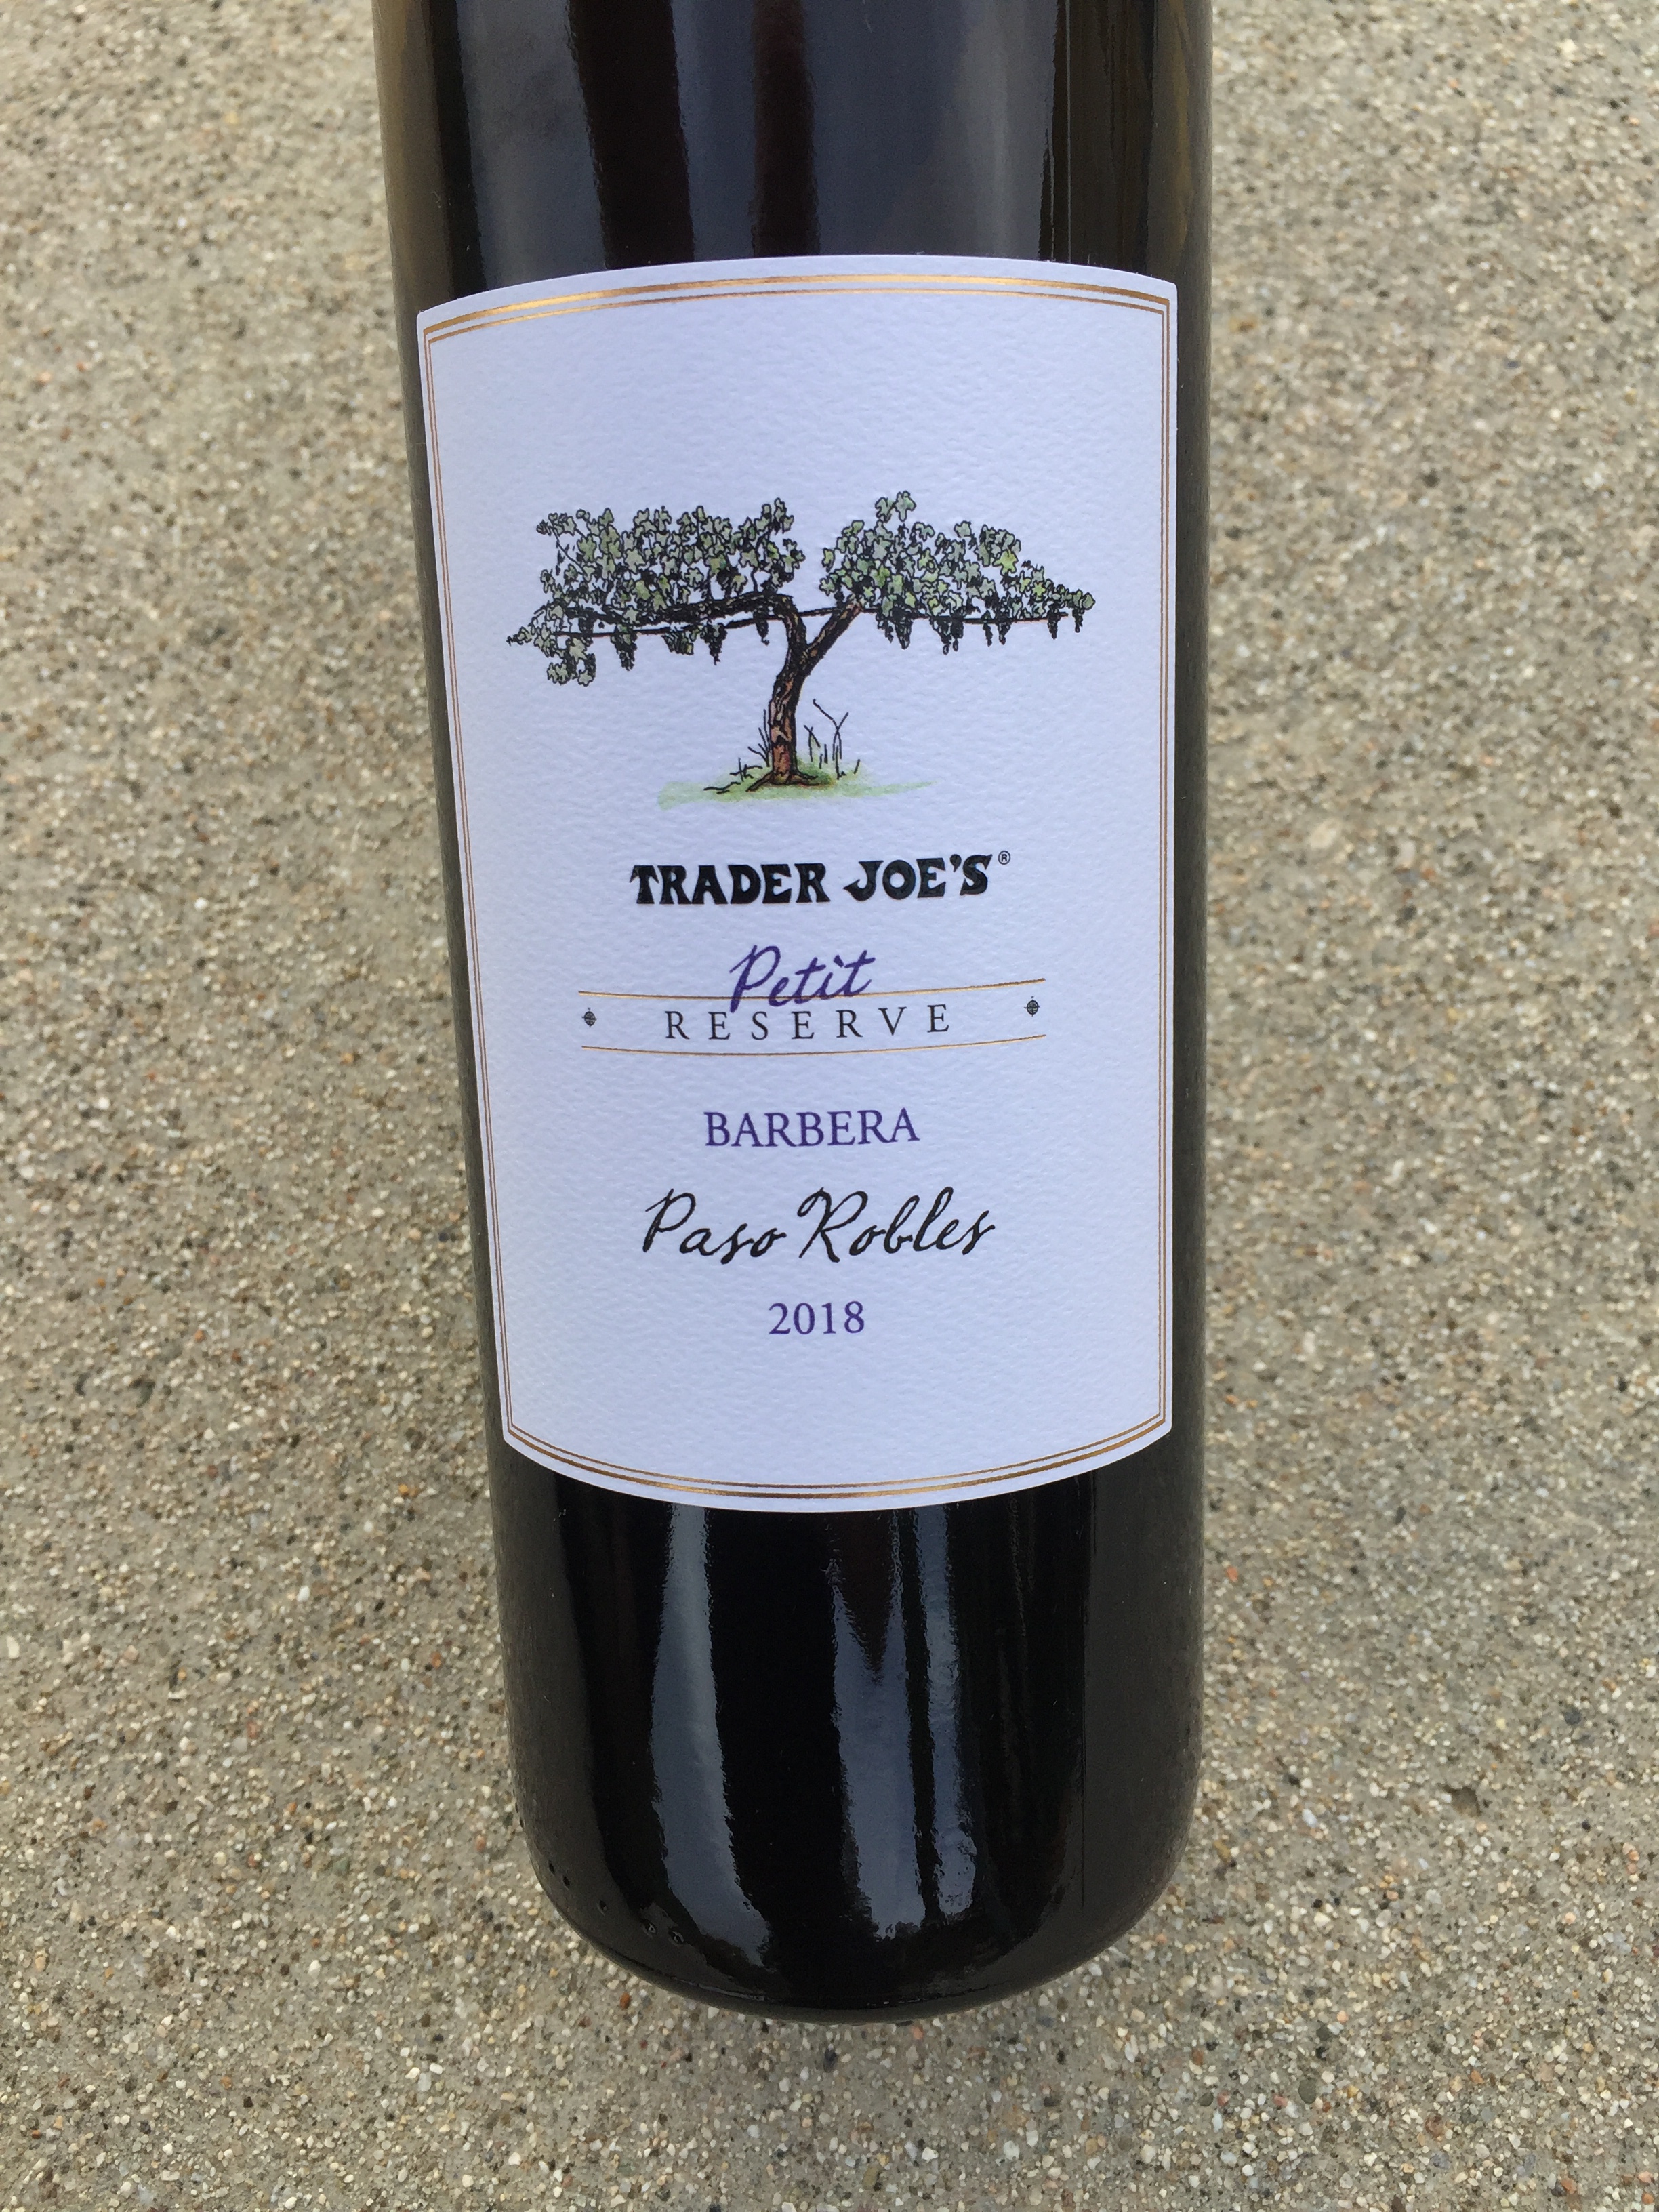 Close up photo of the front label of Trader Joe's Petit Reserve Barbera 2018 Paso Robles